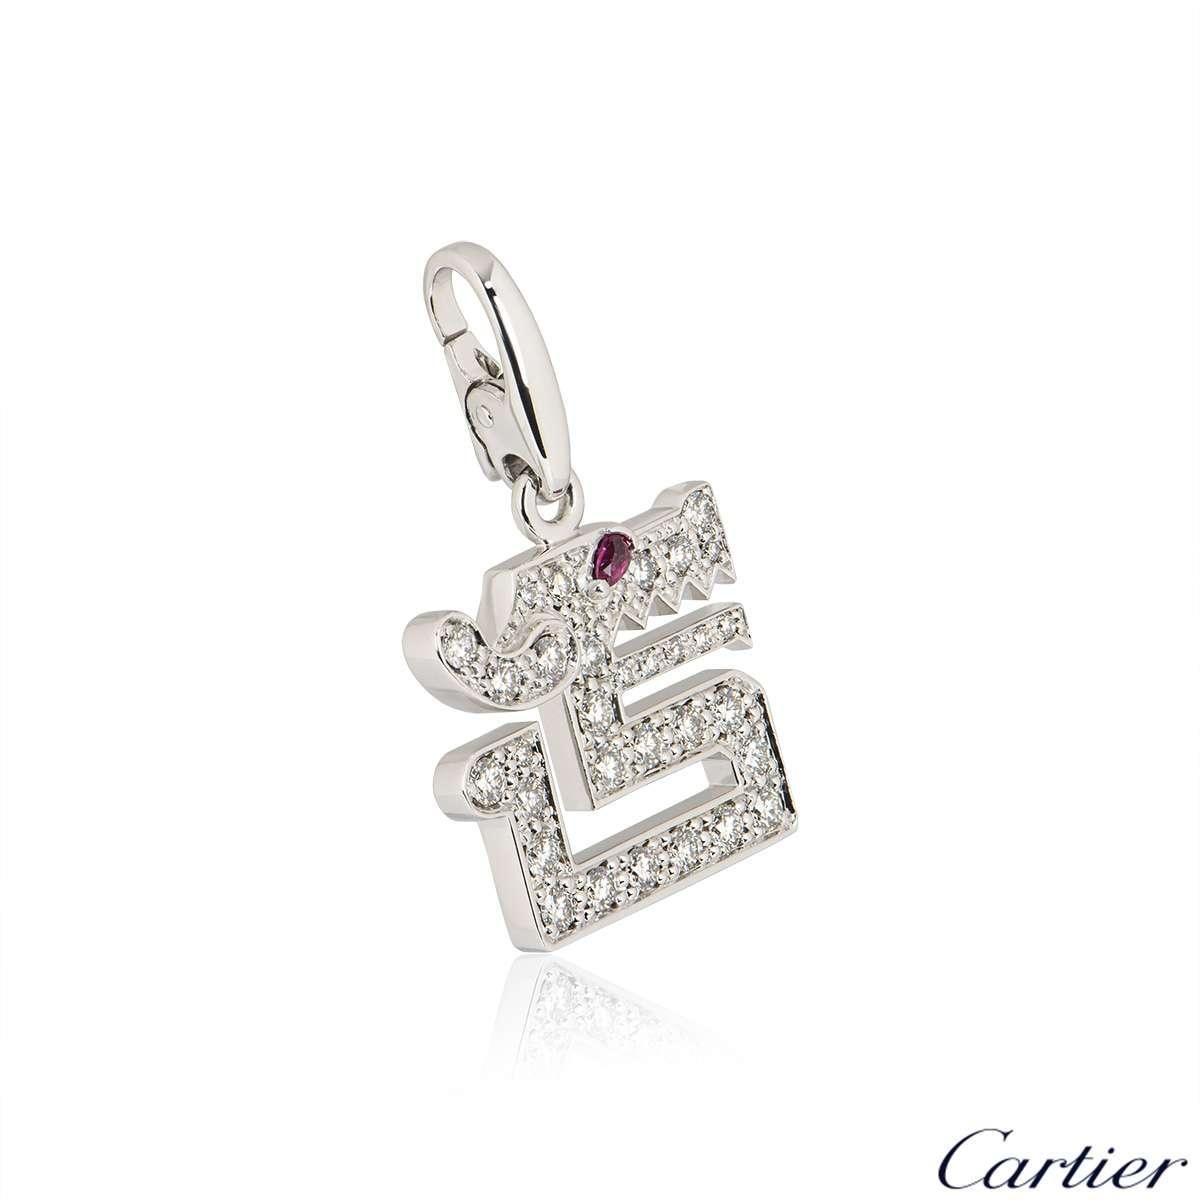 An 18k white gold Le Basier Du Dragon charm by Cartier. The charm is set with round brilliant cut diamonds totalling approximately 0.46ct and a single pear cut ruby for the eye weighing approximately 0.02ct. The charm measures 1.5cm in width and